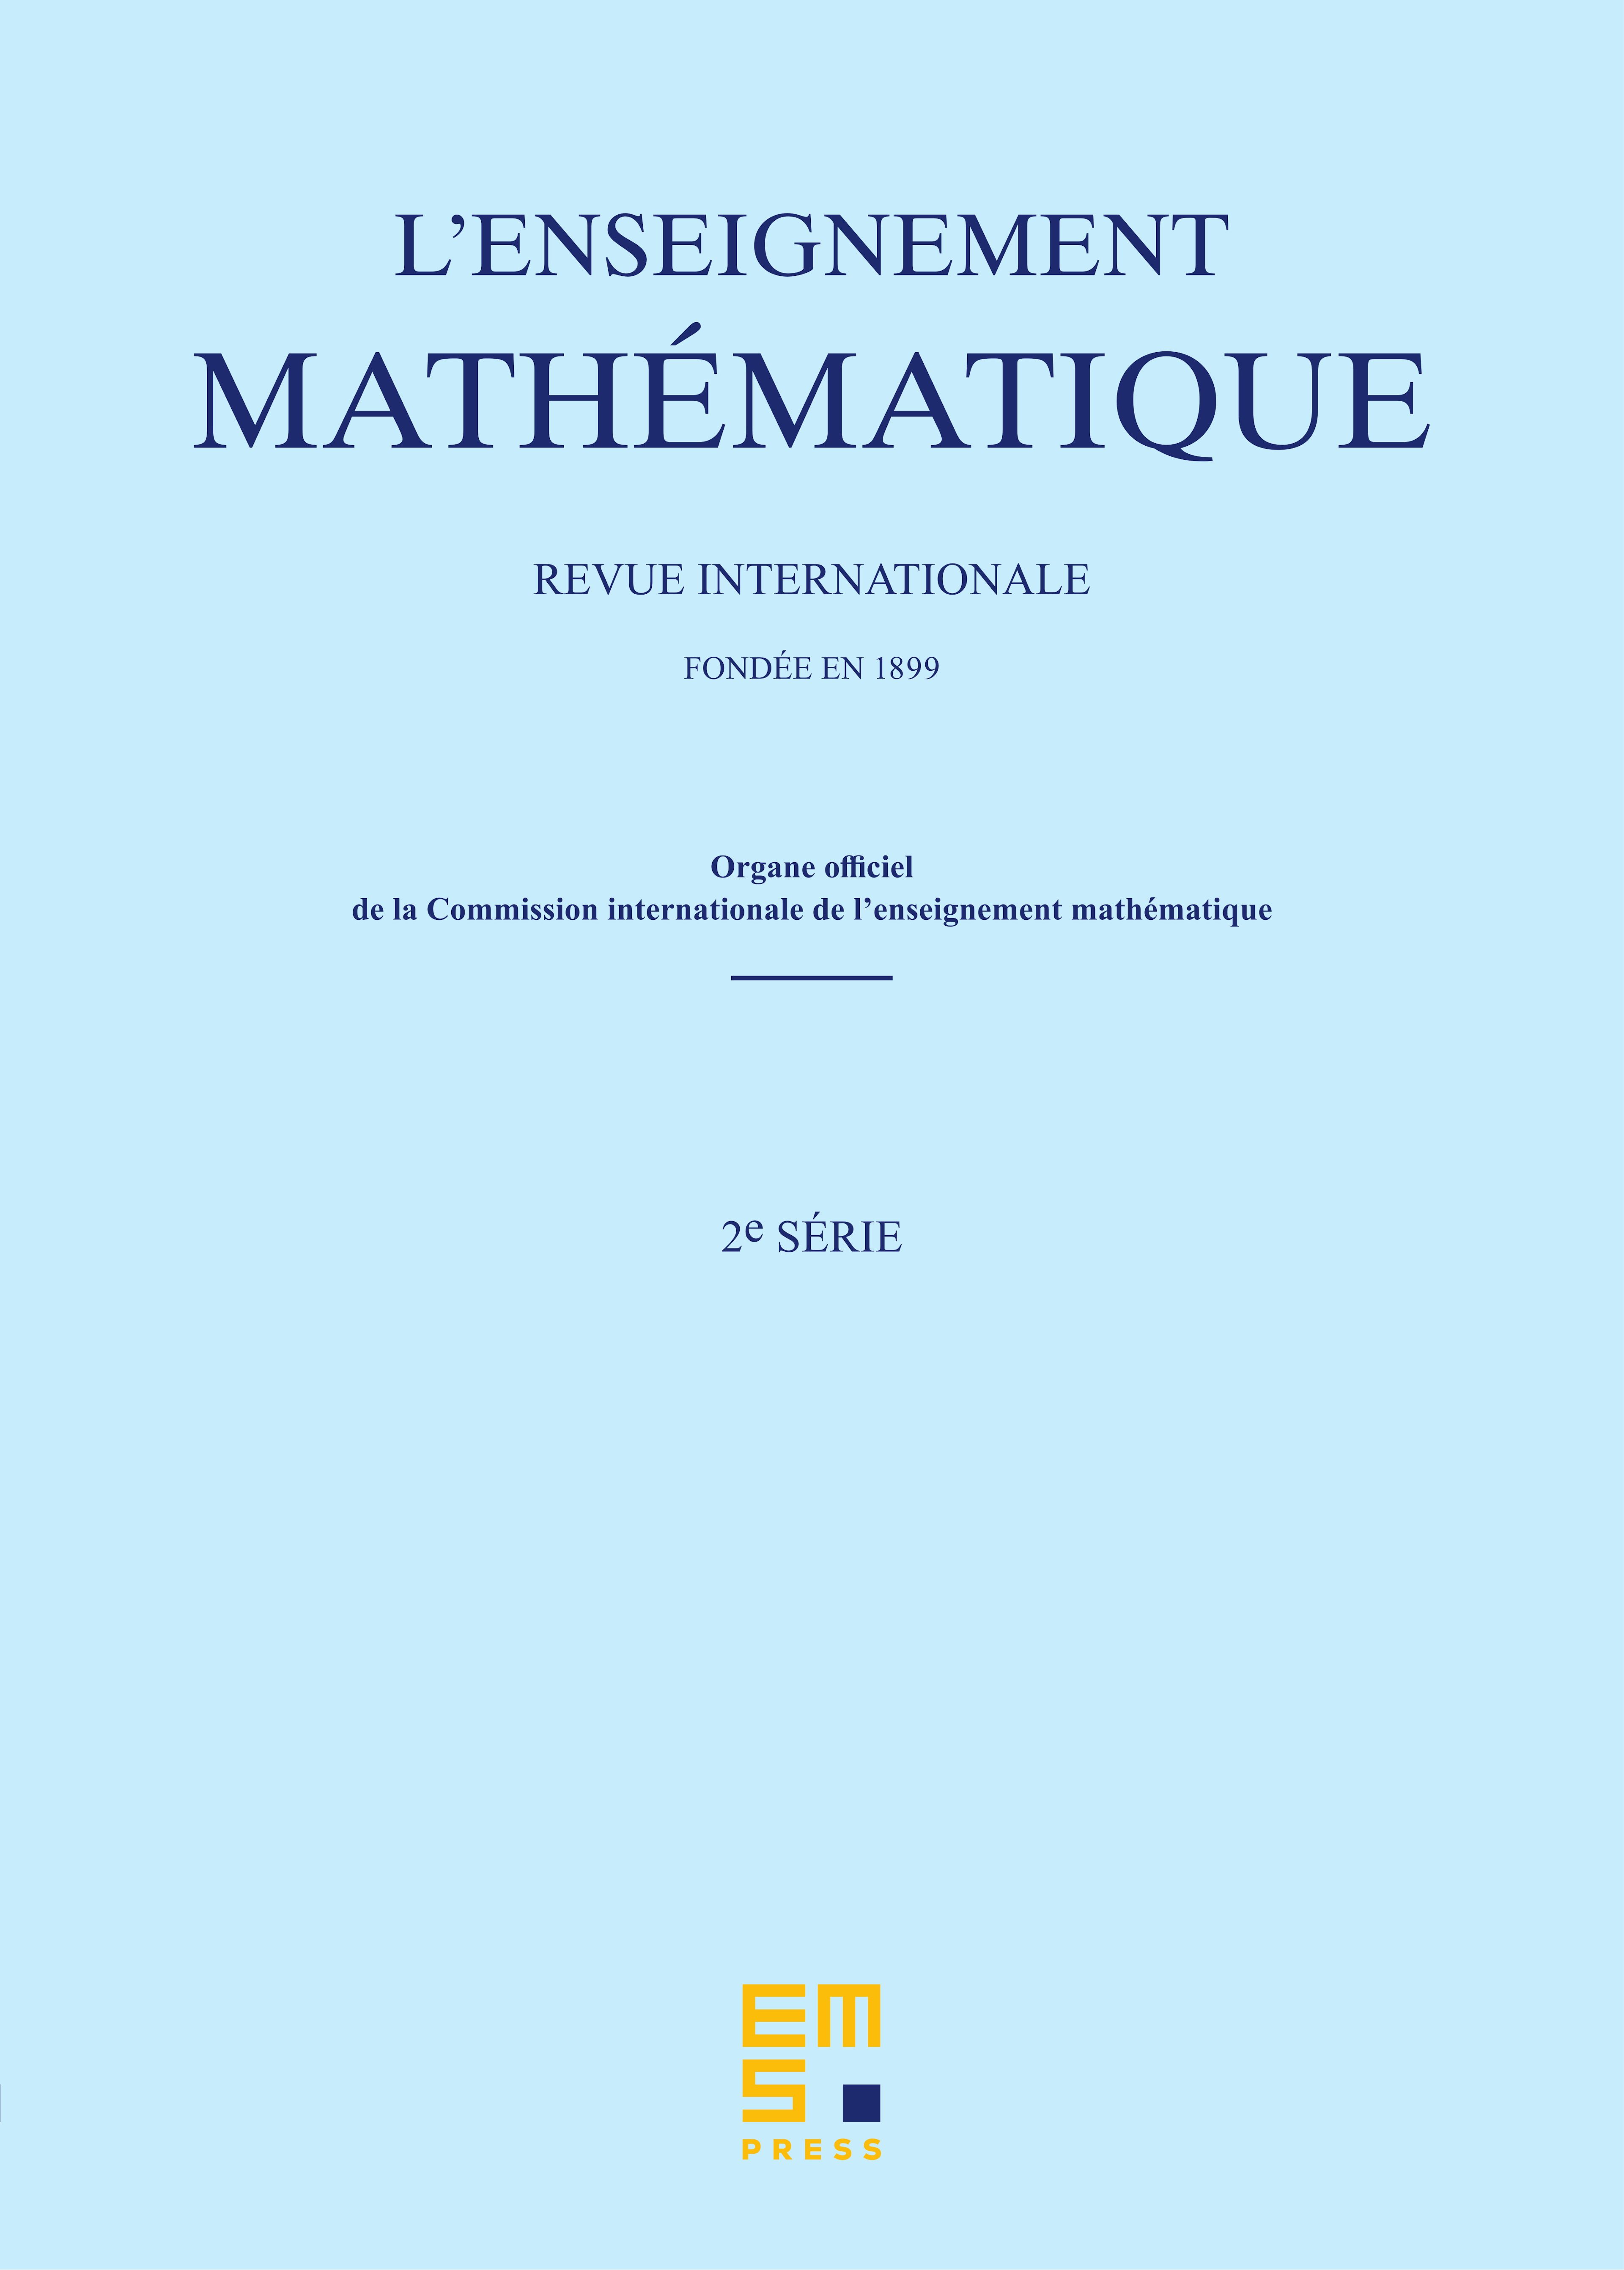 Nodal quintic surfaces and lines on cubic fourfolds (with an appendix by John Christian Ottem) cover